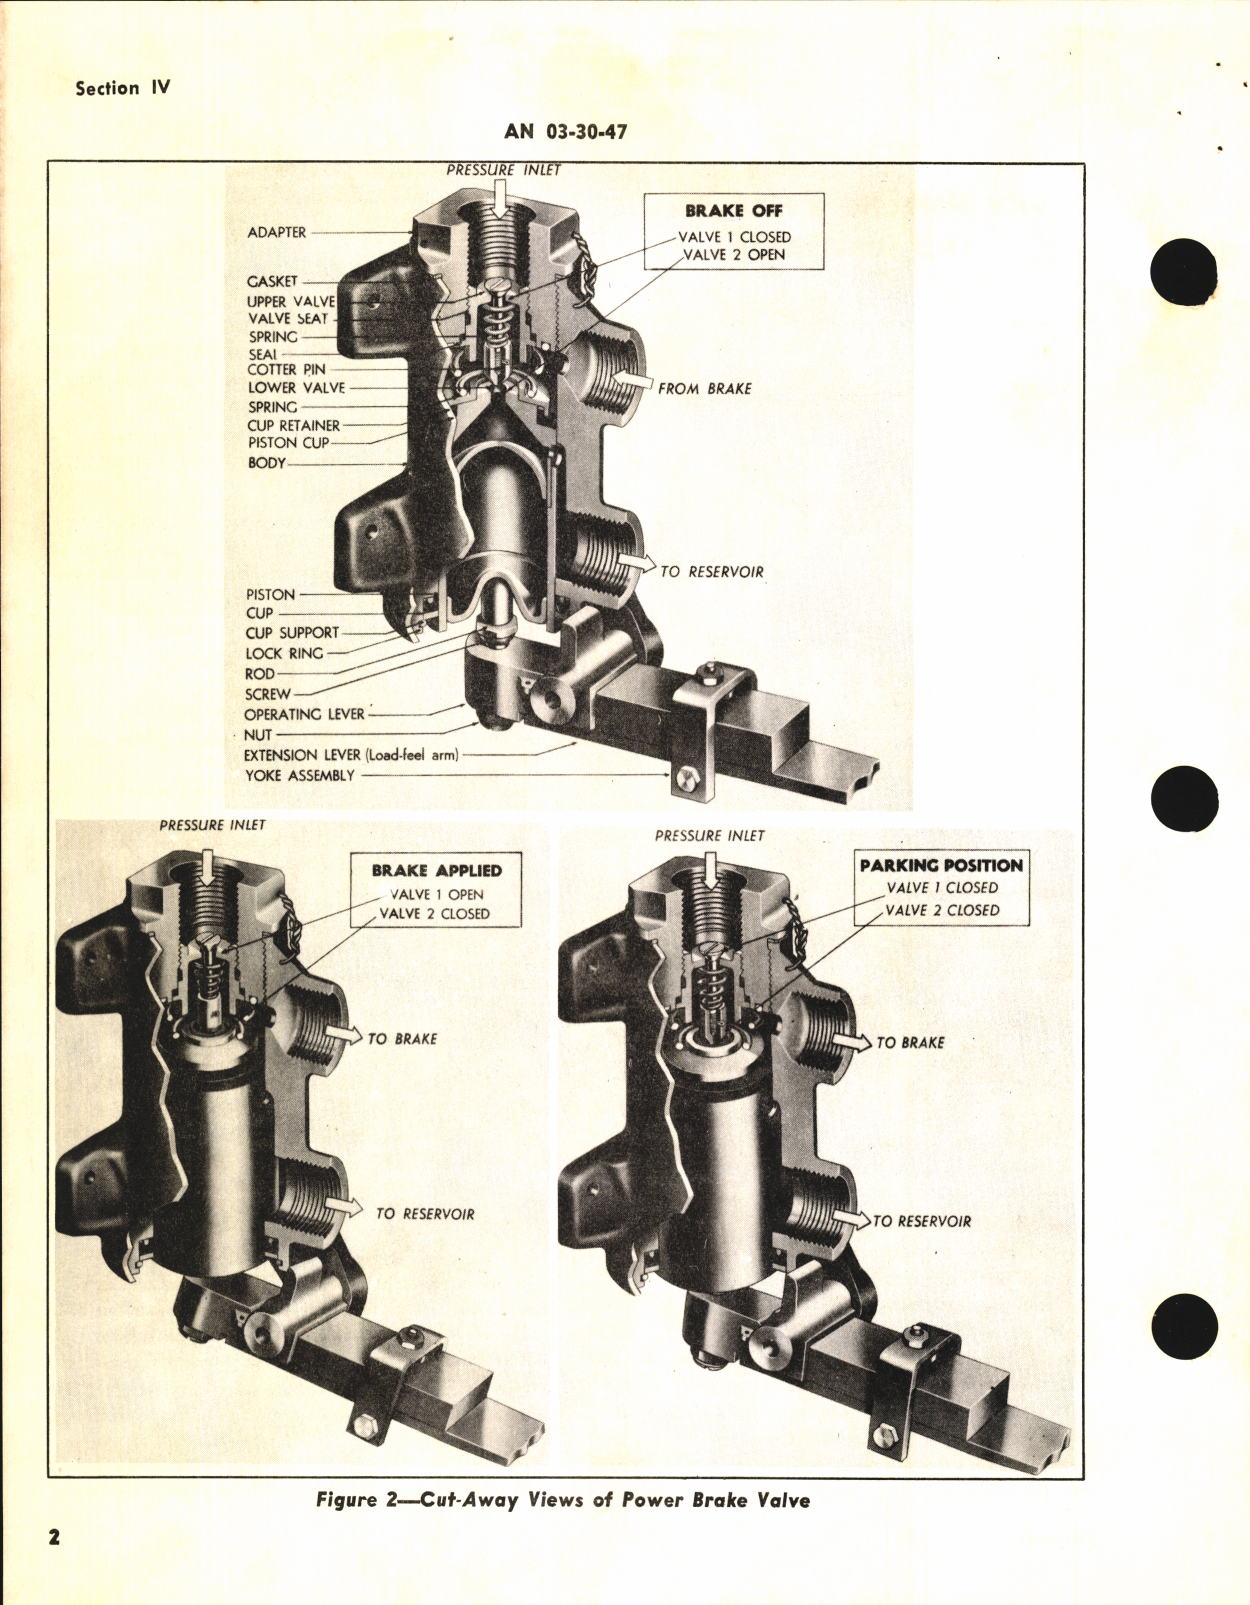 Sample page 6 from AirCorps Library document: Operation, Service & Overhaul Instructions with Parts Catalog for Power Brake Valves